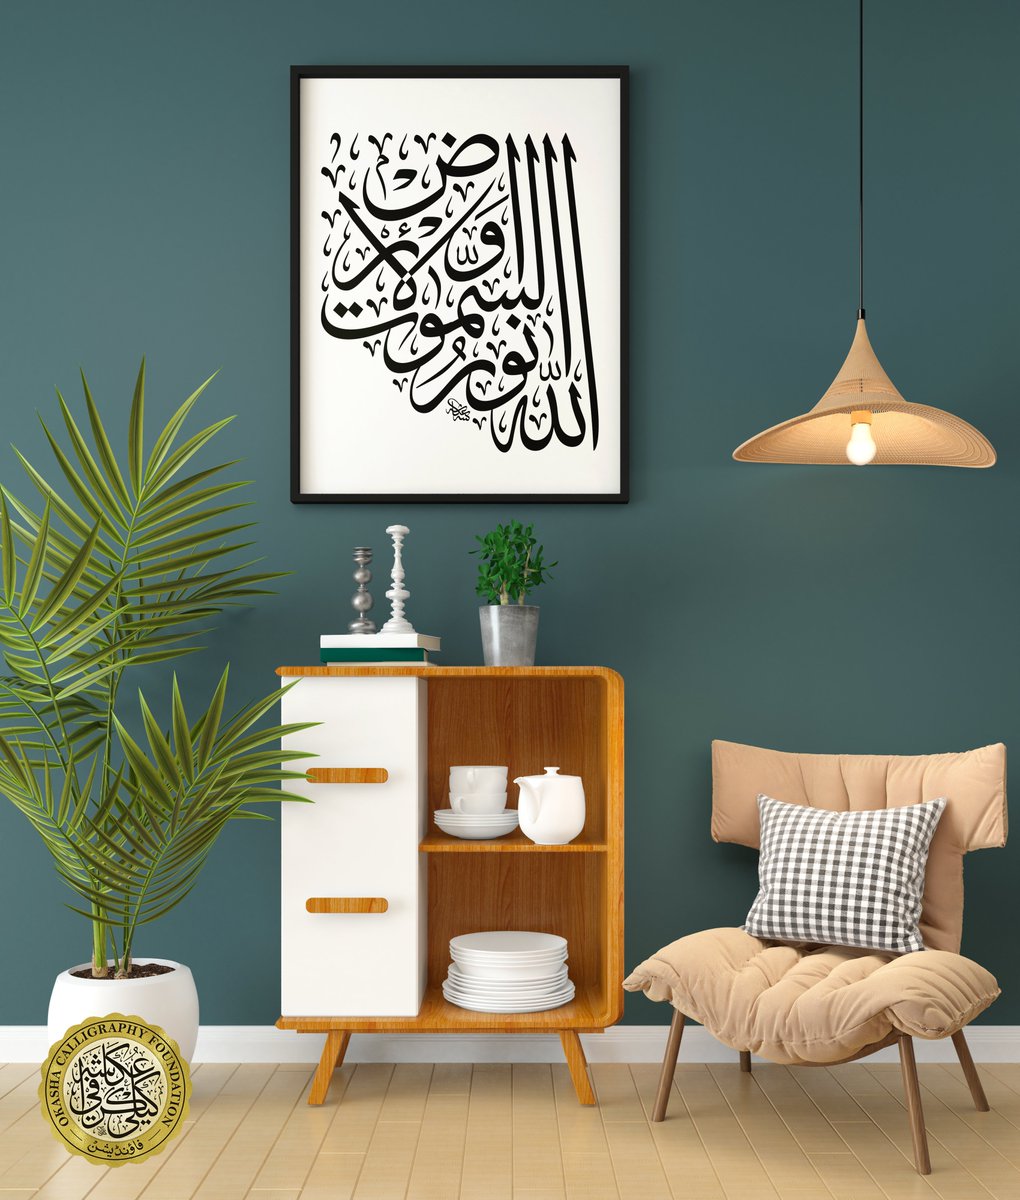 So beautiful. Art and calligraphy in particular can be a great form of self-expression! #calligraphy #moderncalligraphy #calligraphyart #calligraphypractice #calligrapher #calligraphymaster #arabiccalligraphy #islamiccalligraphy #LearnCalligraphy #okashacalligraphy #thuluth